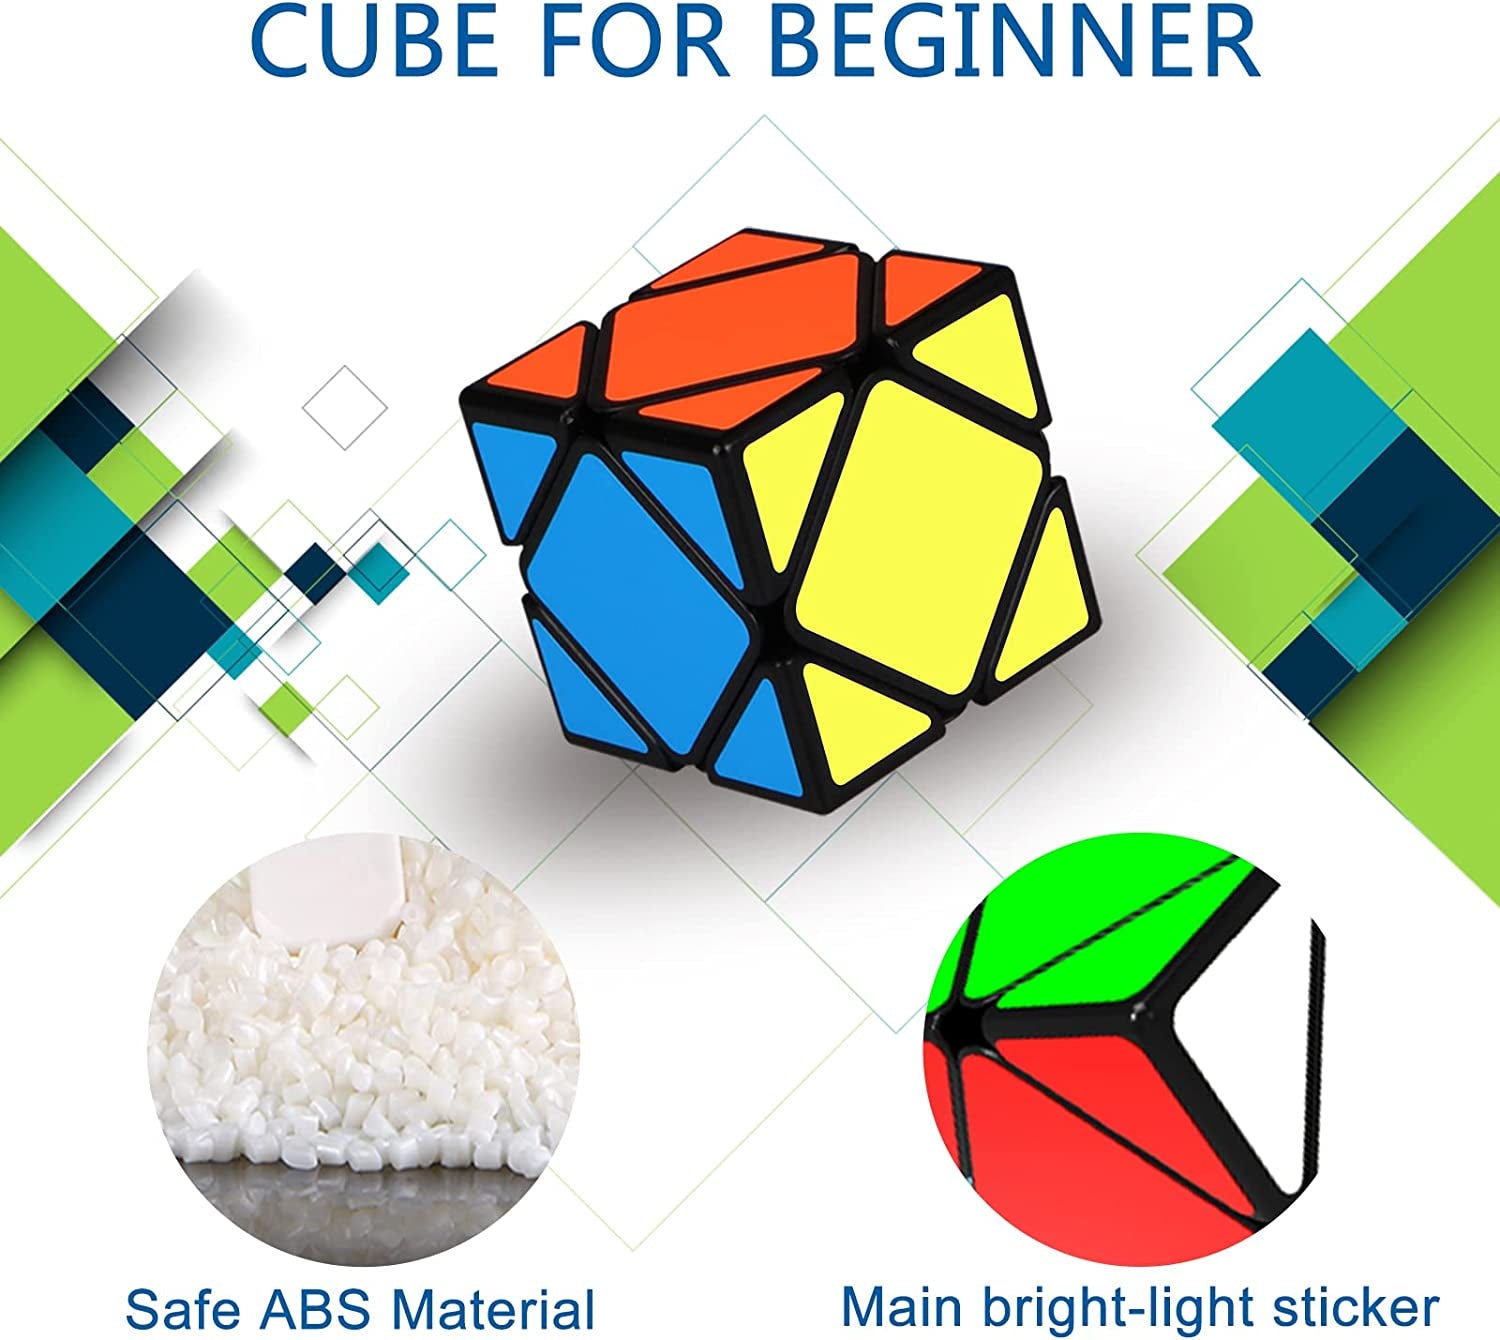 5 Pack Speed Cube Set, Puzzle Cube Bundle 2X2 3X3 Pyramid Dodecahedron Skewb Magic Cube Set, Smooth Sticker Cubes Games Toy